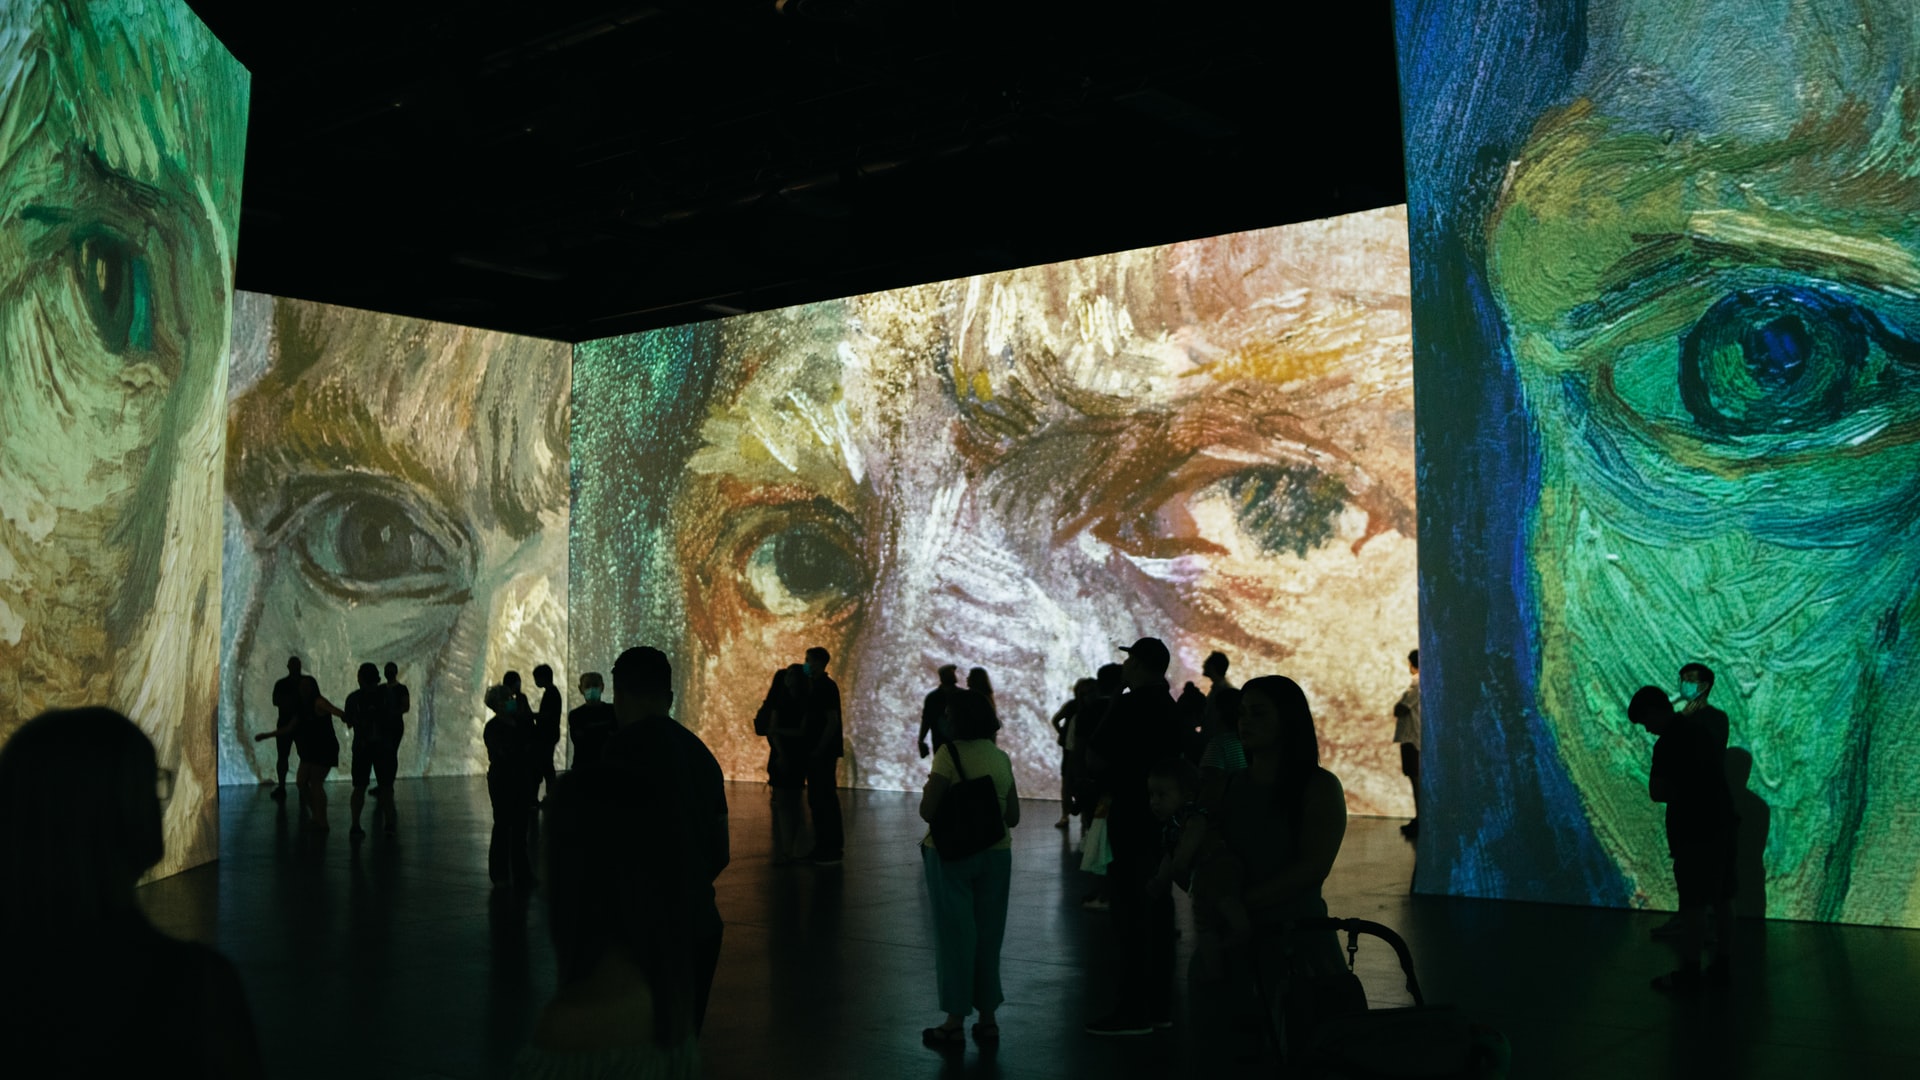 Happening Now in DC: Van Gogh, The Immersive Experience